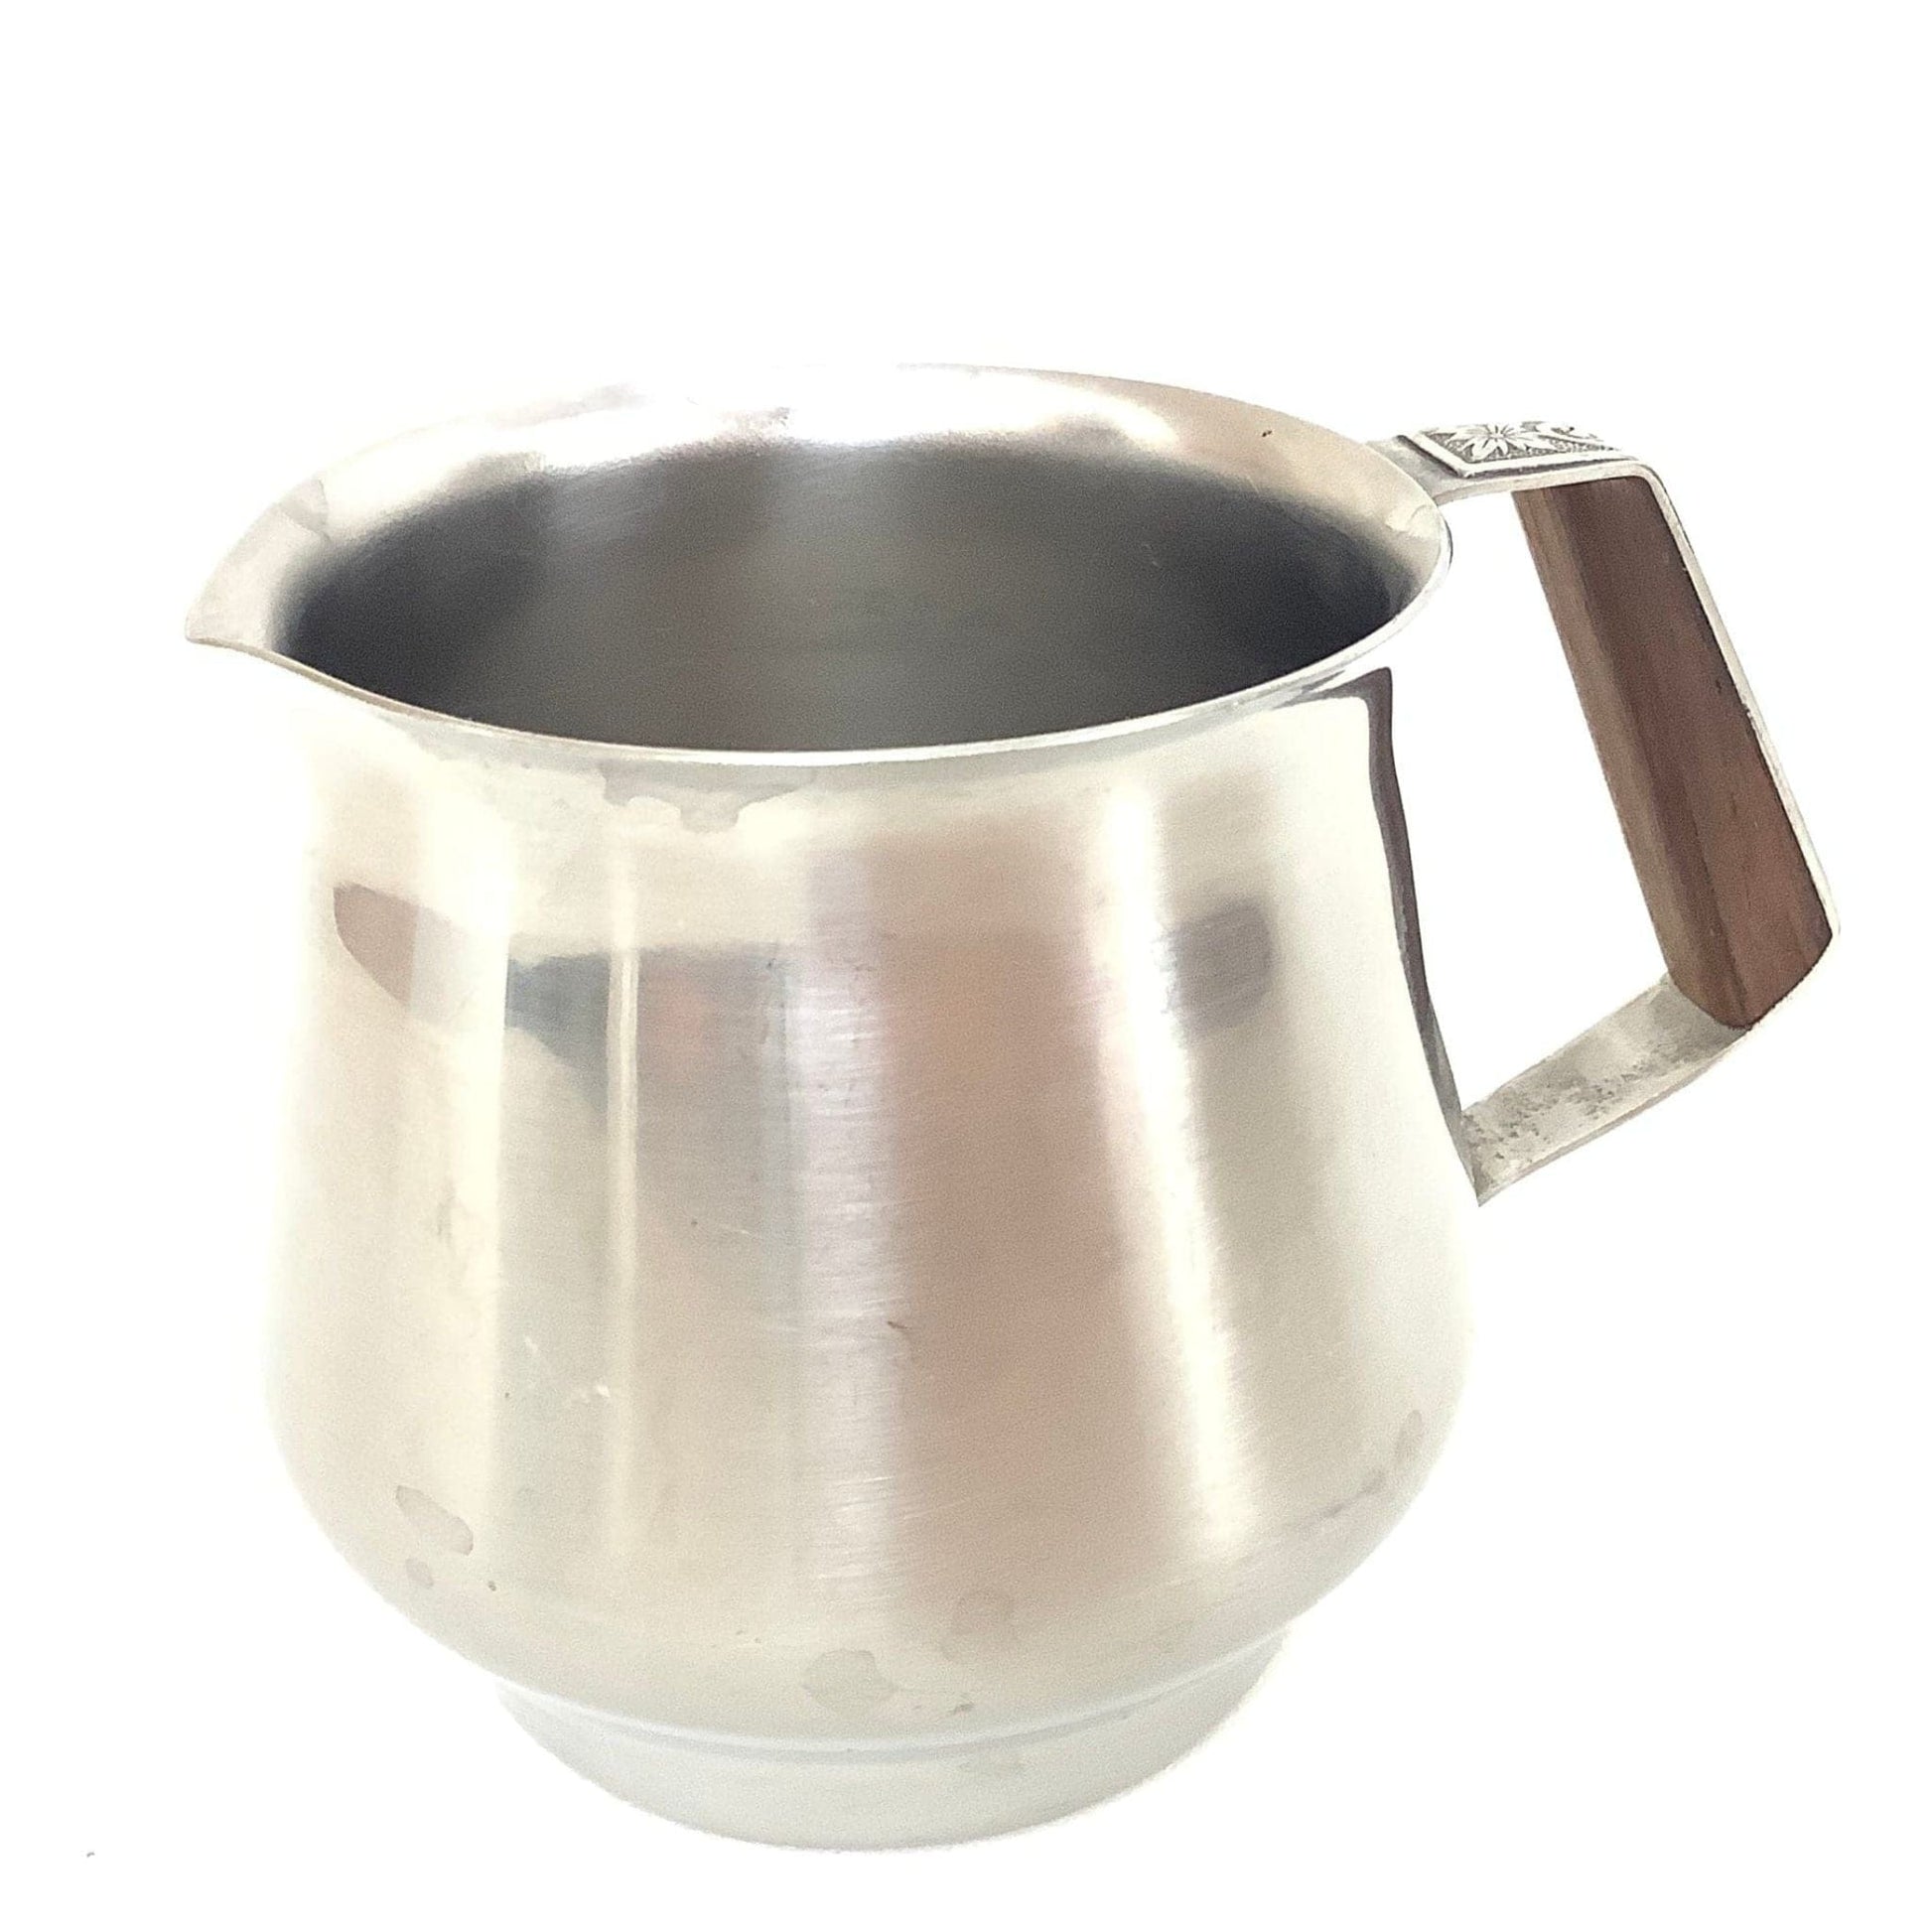 1950s Stainless Creamer Stainless / Stainless / Mid Century Modern